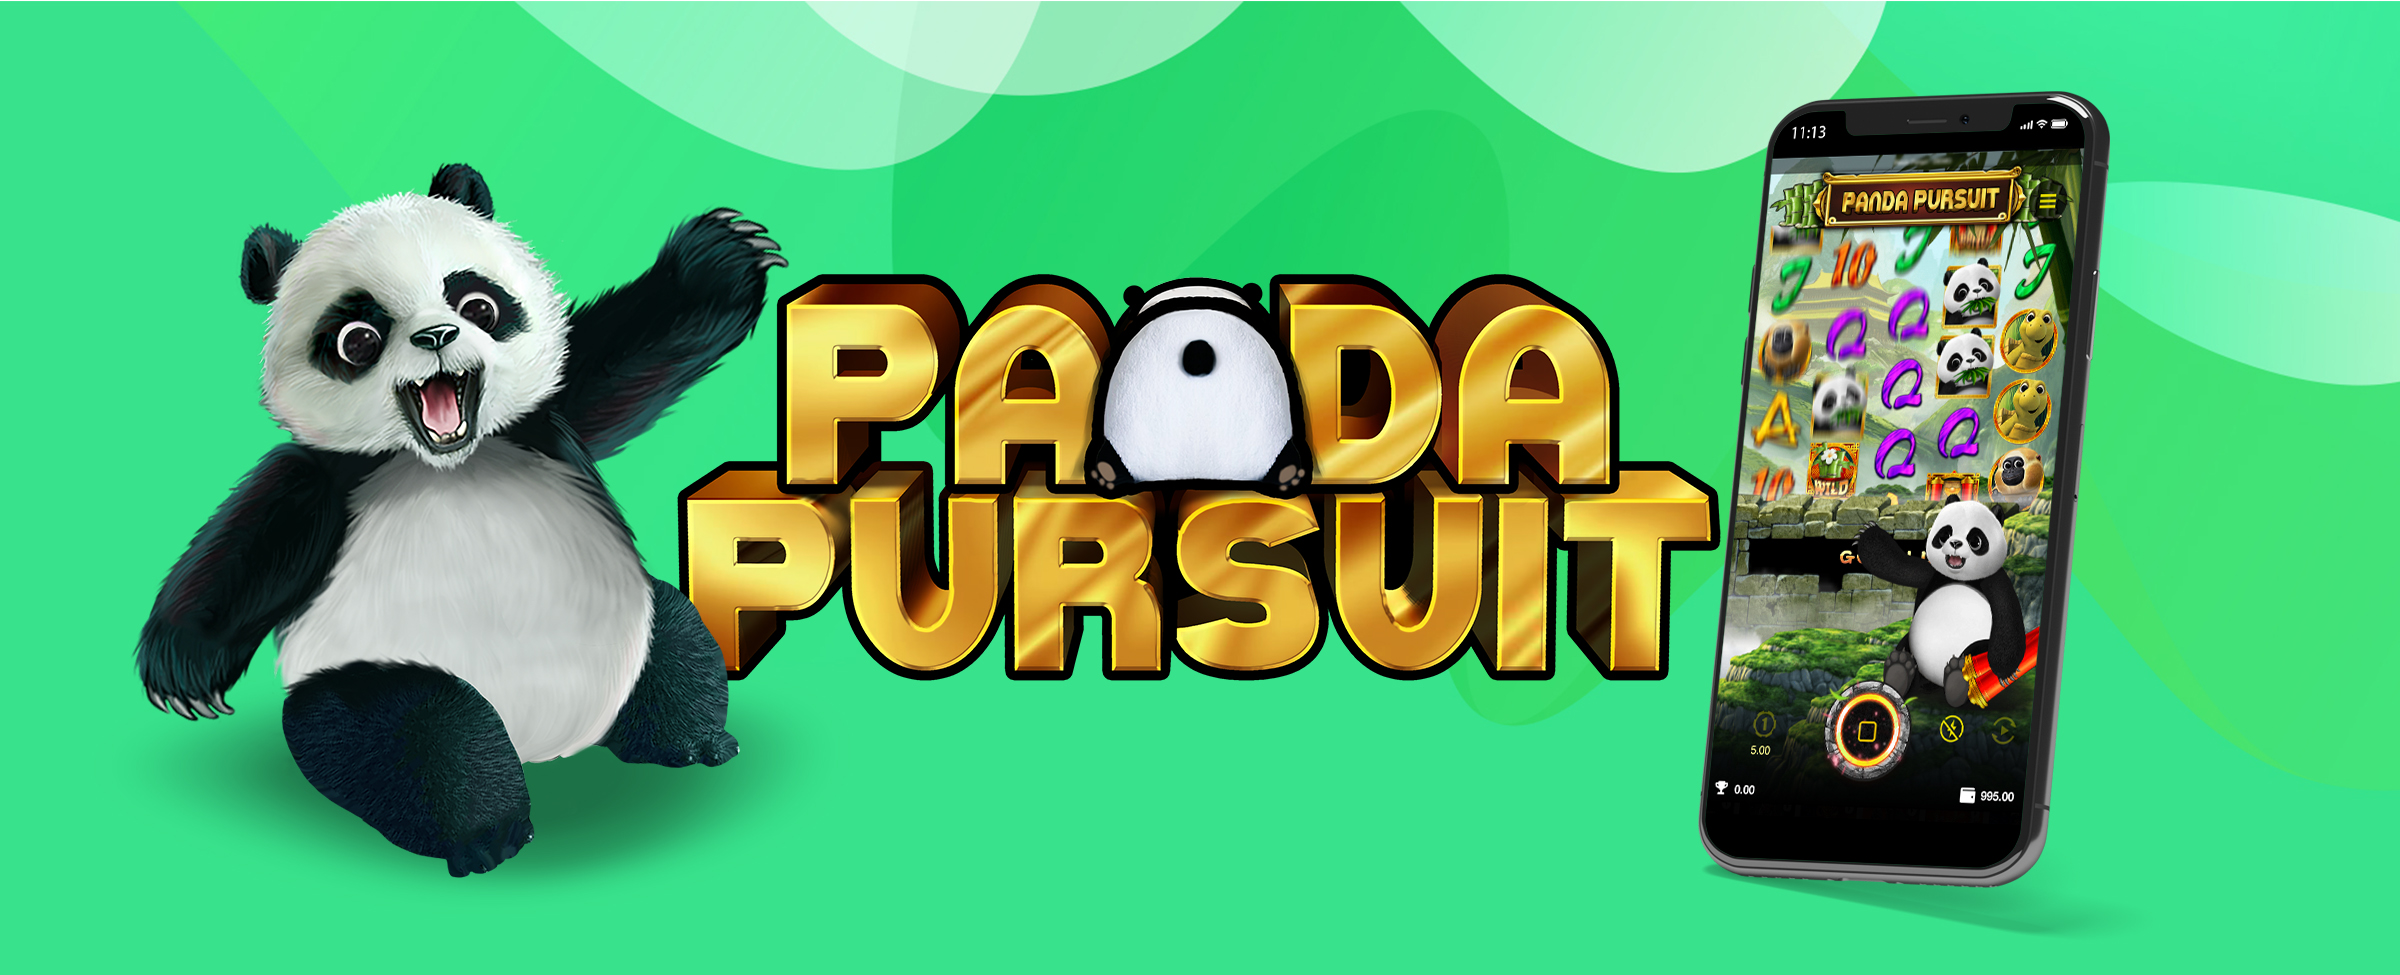 If you love this game, you will most certainly love the OG: Panda Pursuit! It’s a jungle gem of a favorite here at SlotsLV, and you’ll see why when you get into gameplay. Enjoy!